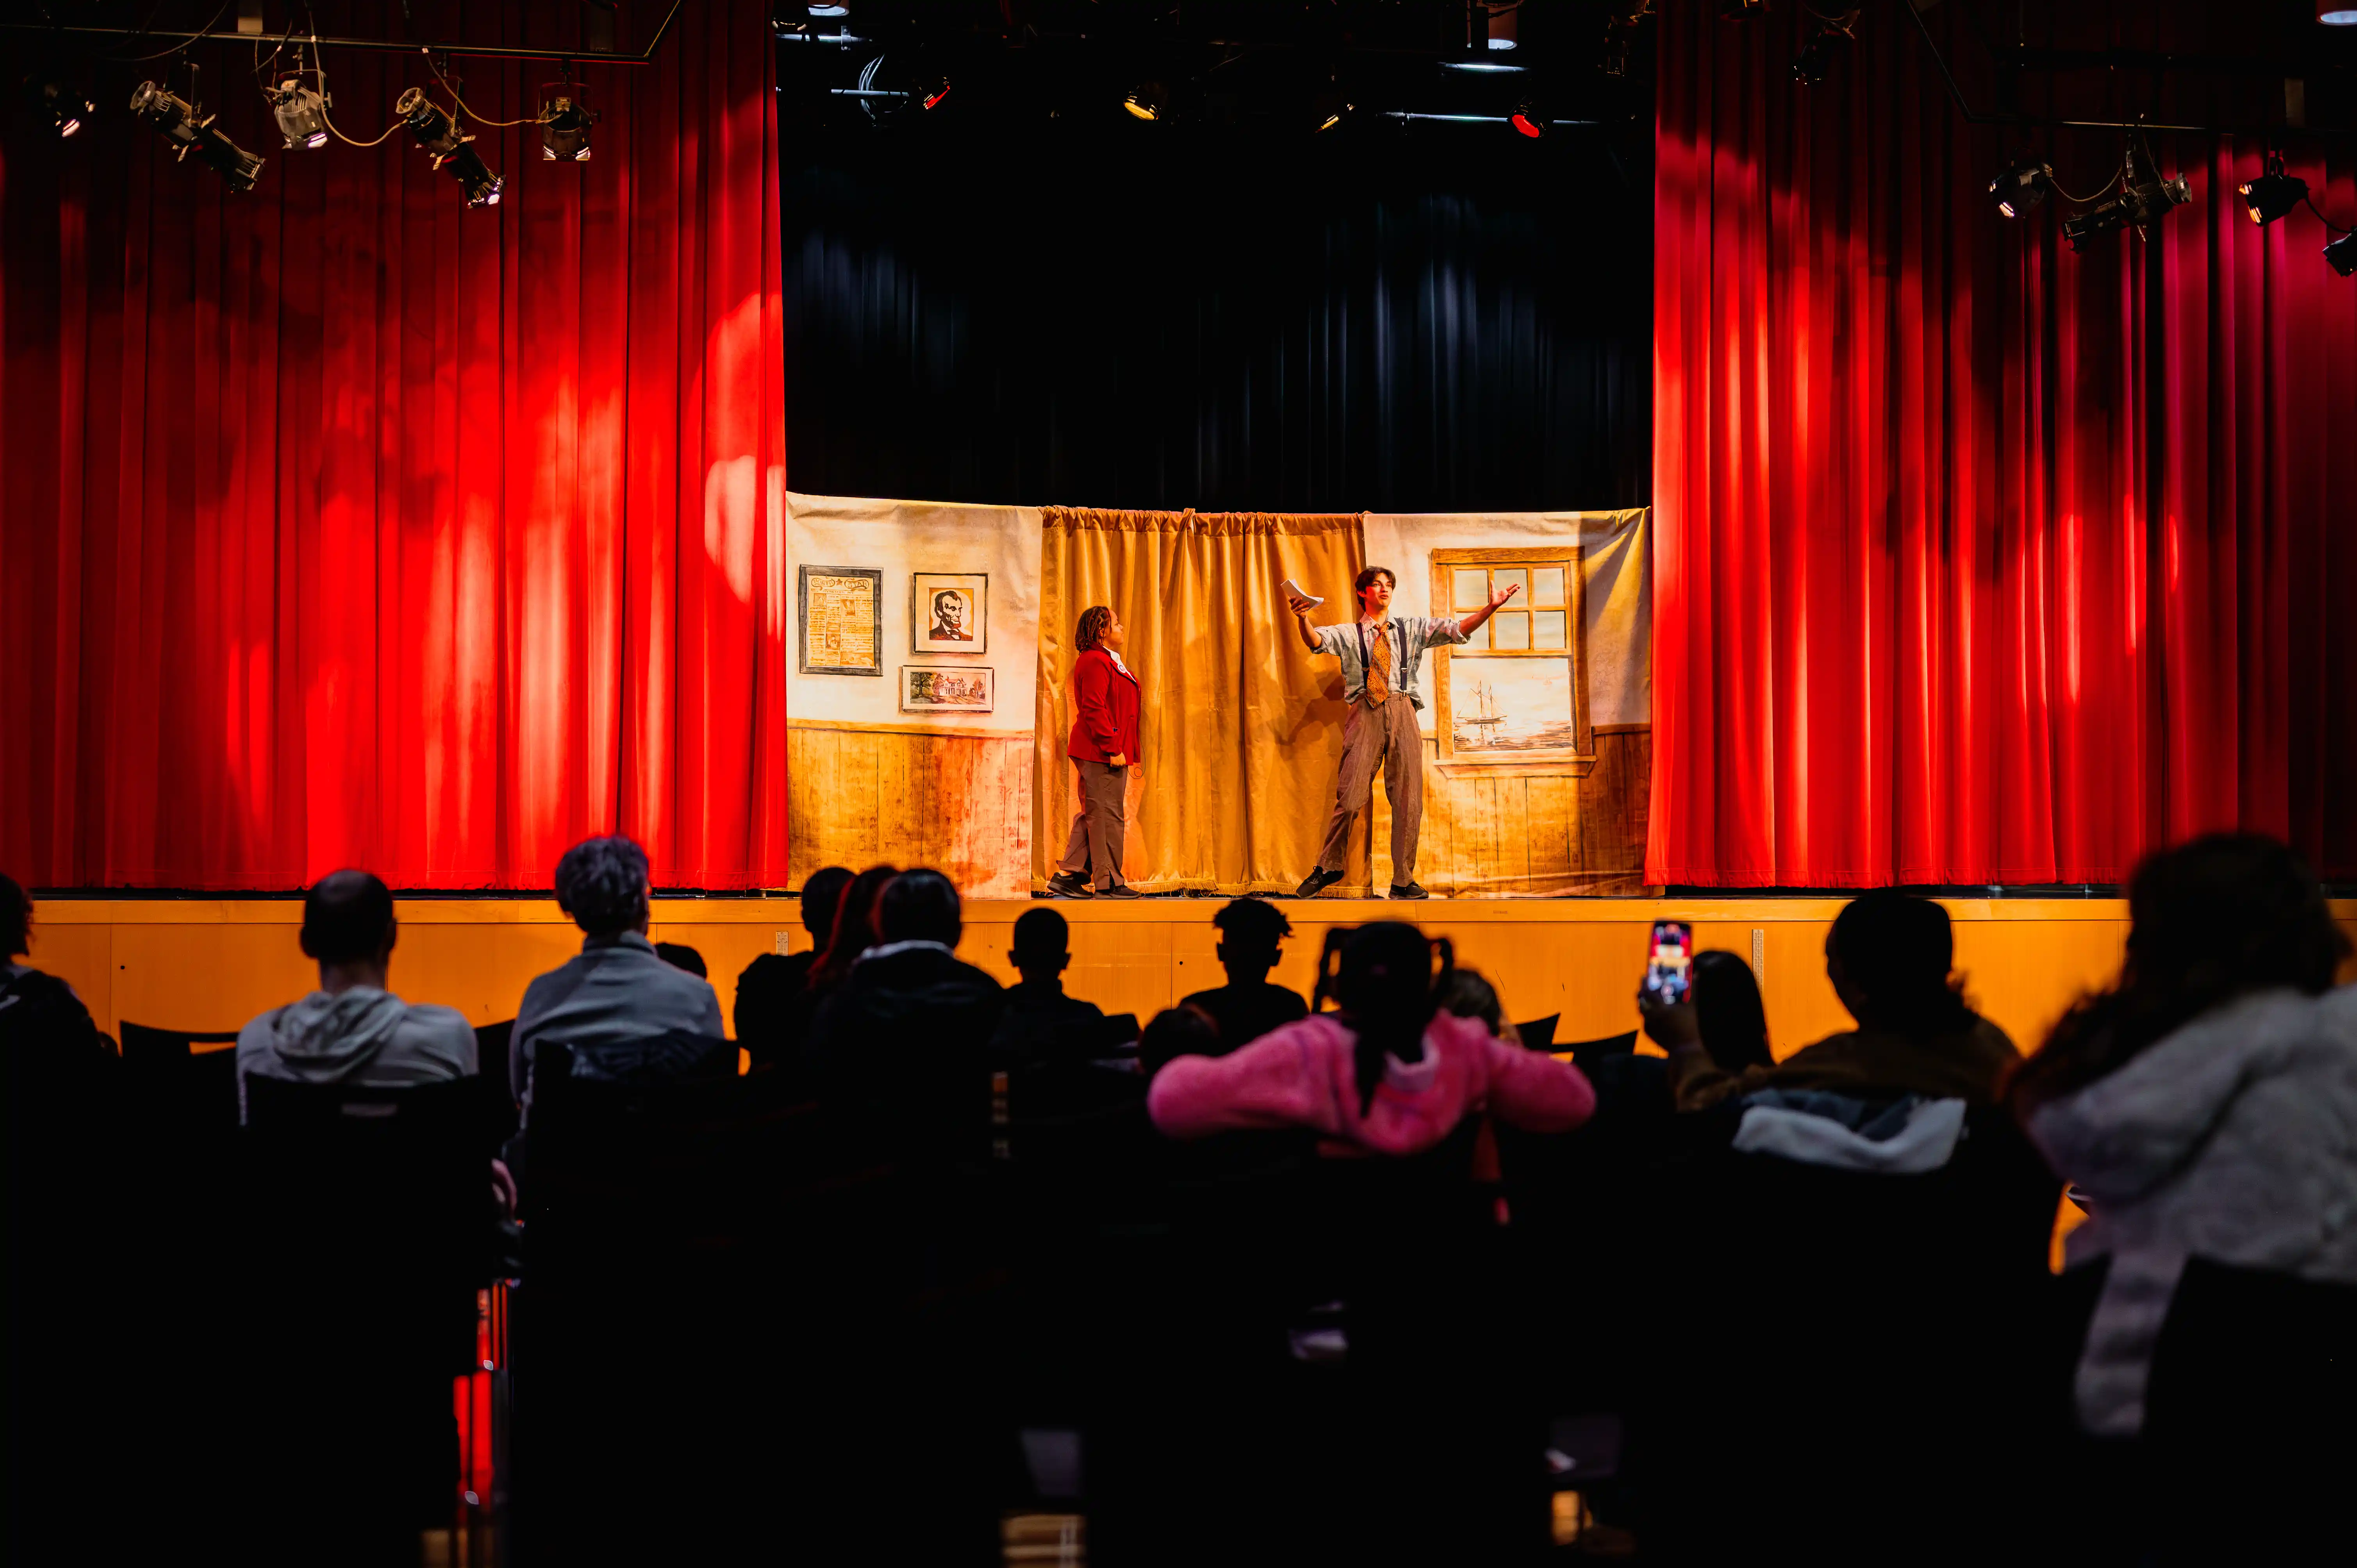 Audience watching a live performance on stage with actors and a red curtain.